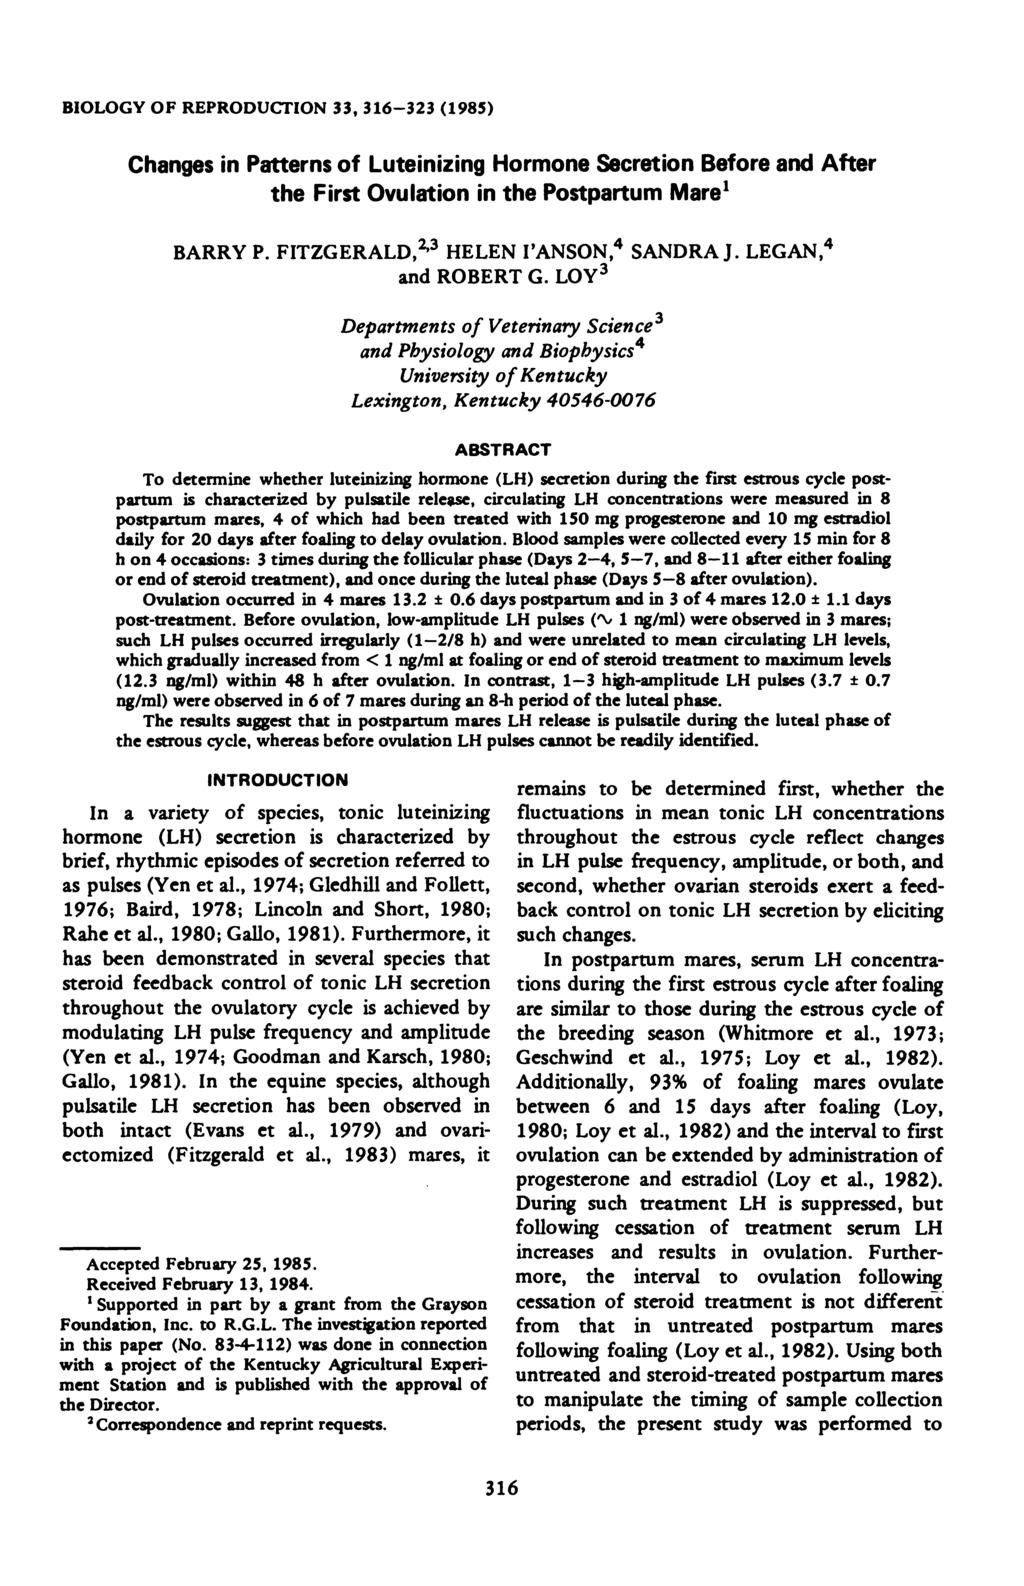 BIOLOGY OF REPRODUCTION 33, 316-33 (1985) Changes in Patterns of Luteinizing Hormone Secretion Before and After the First Ovulation in the Postpartum Mare BARRY P.